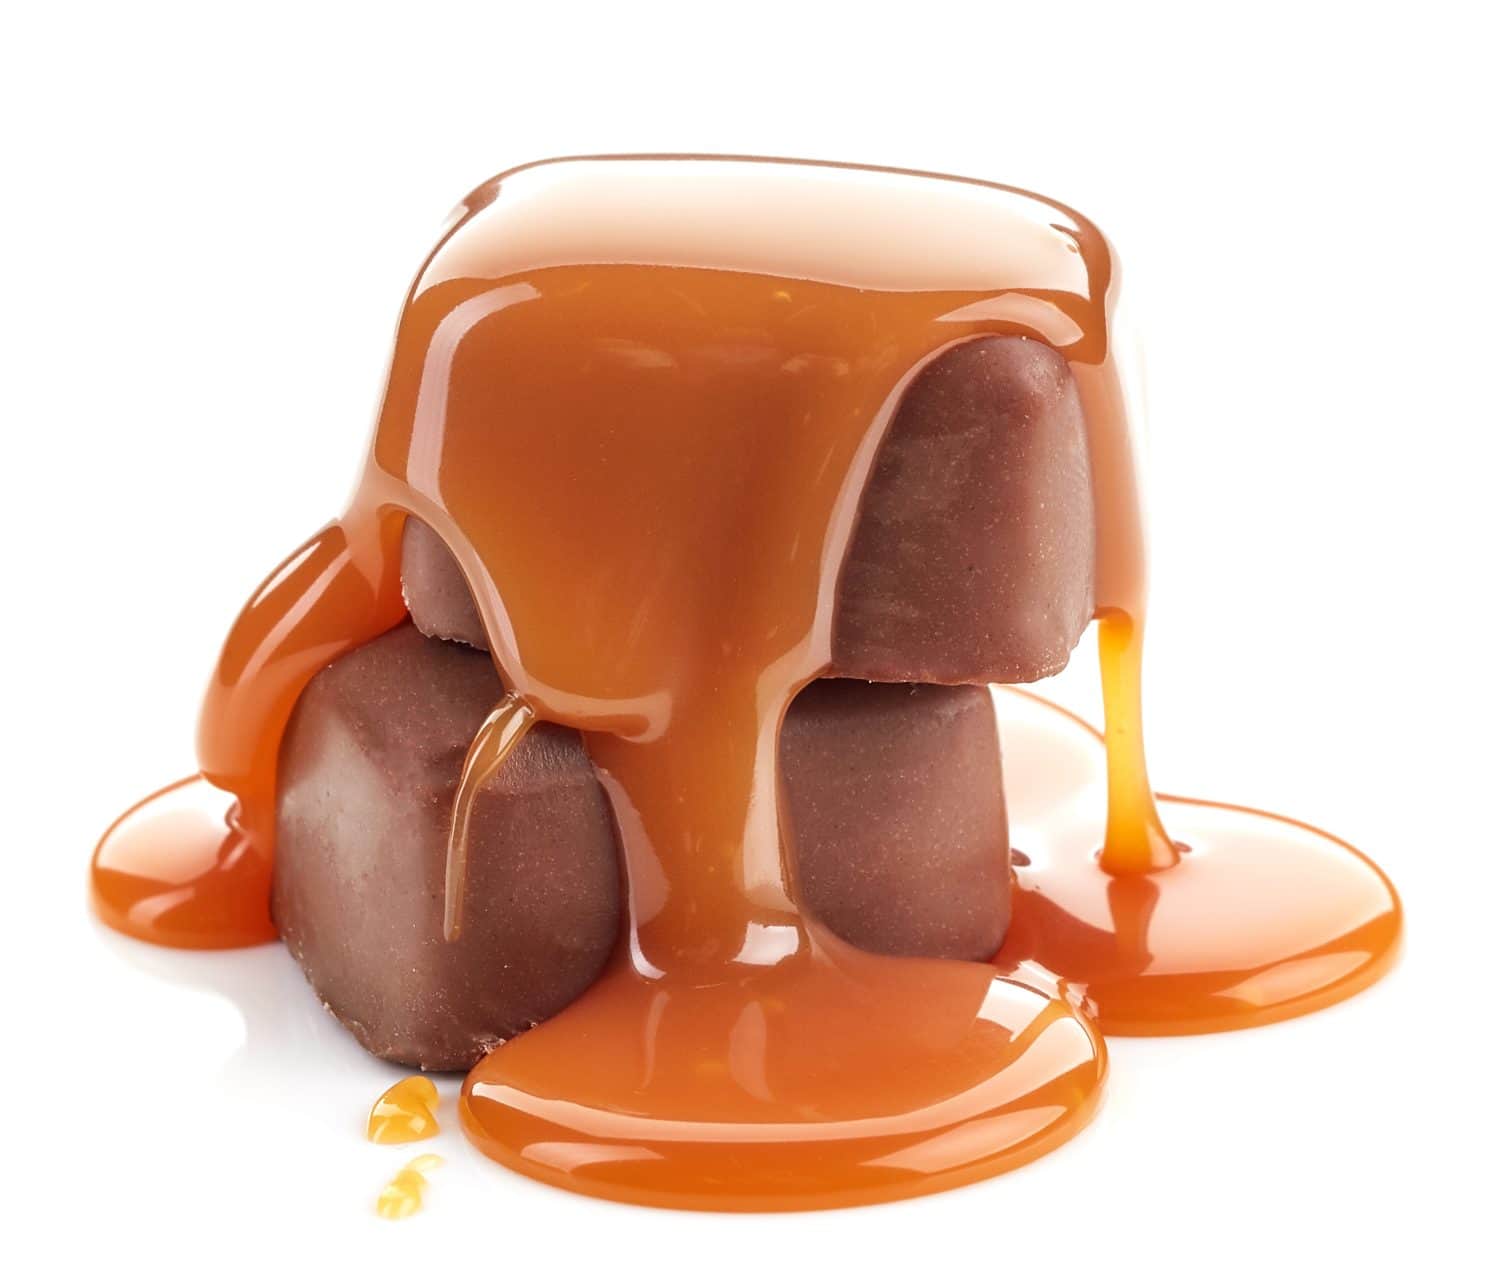 caramel sauce pouring on chocolate candies isolated on white background